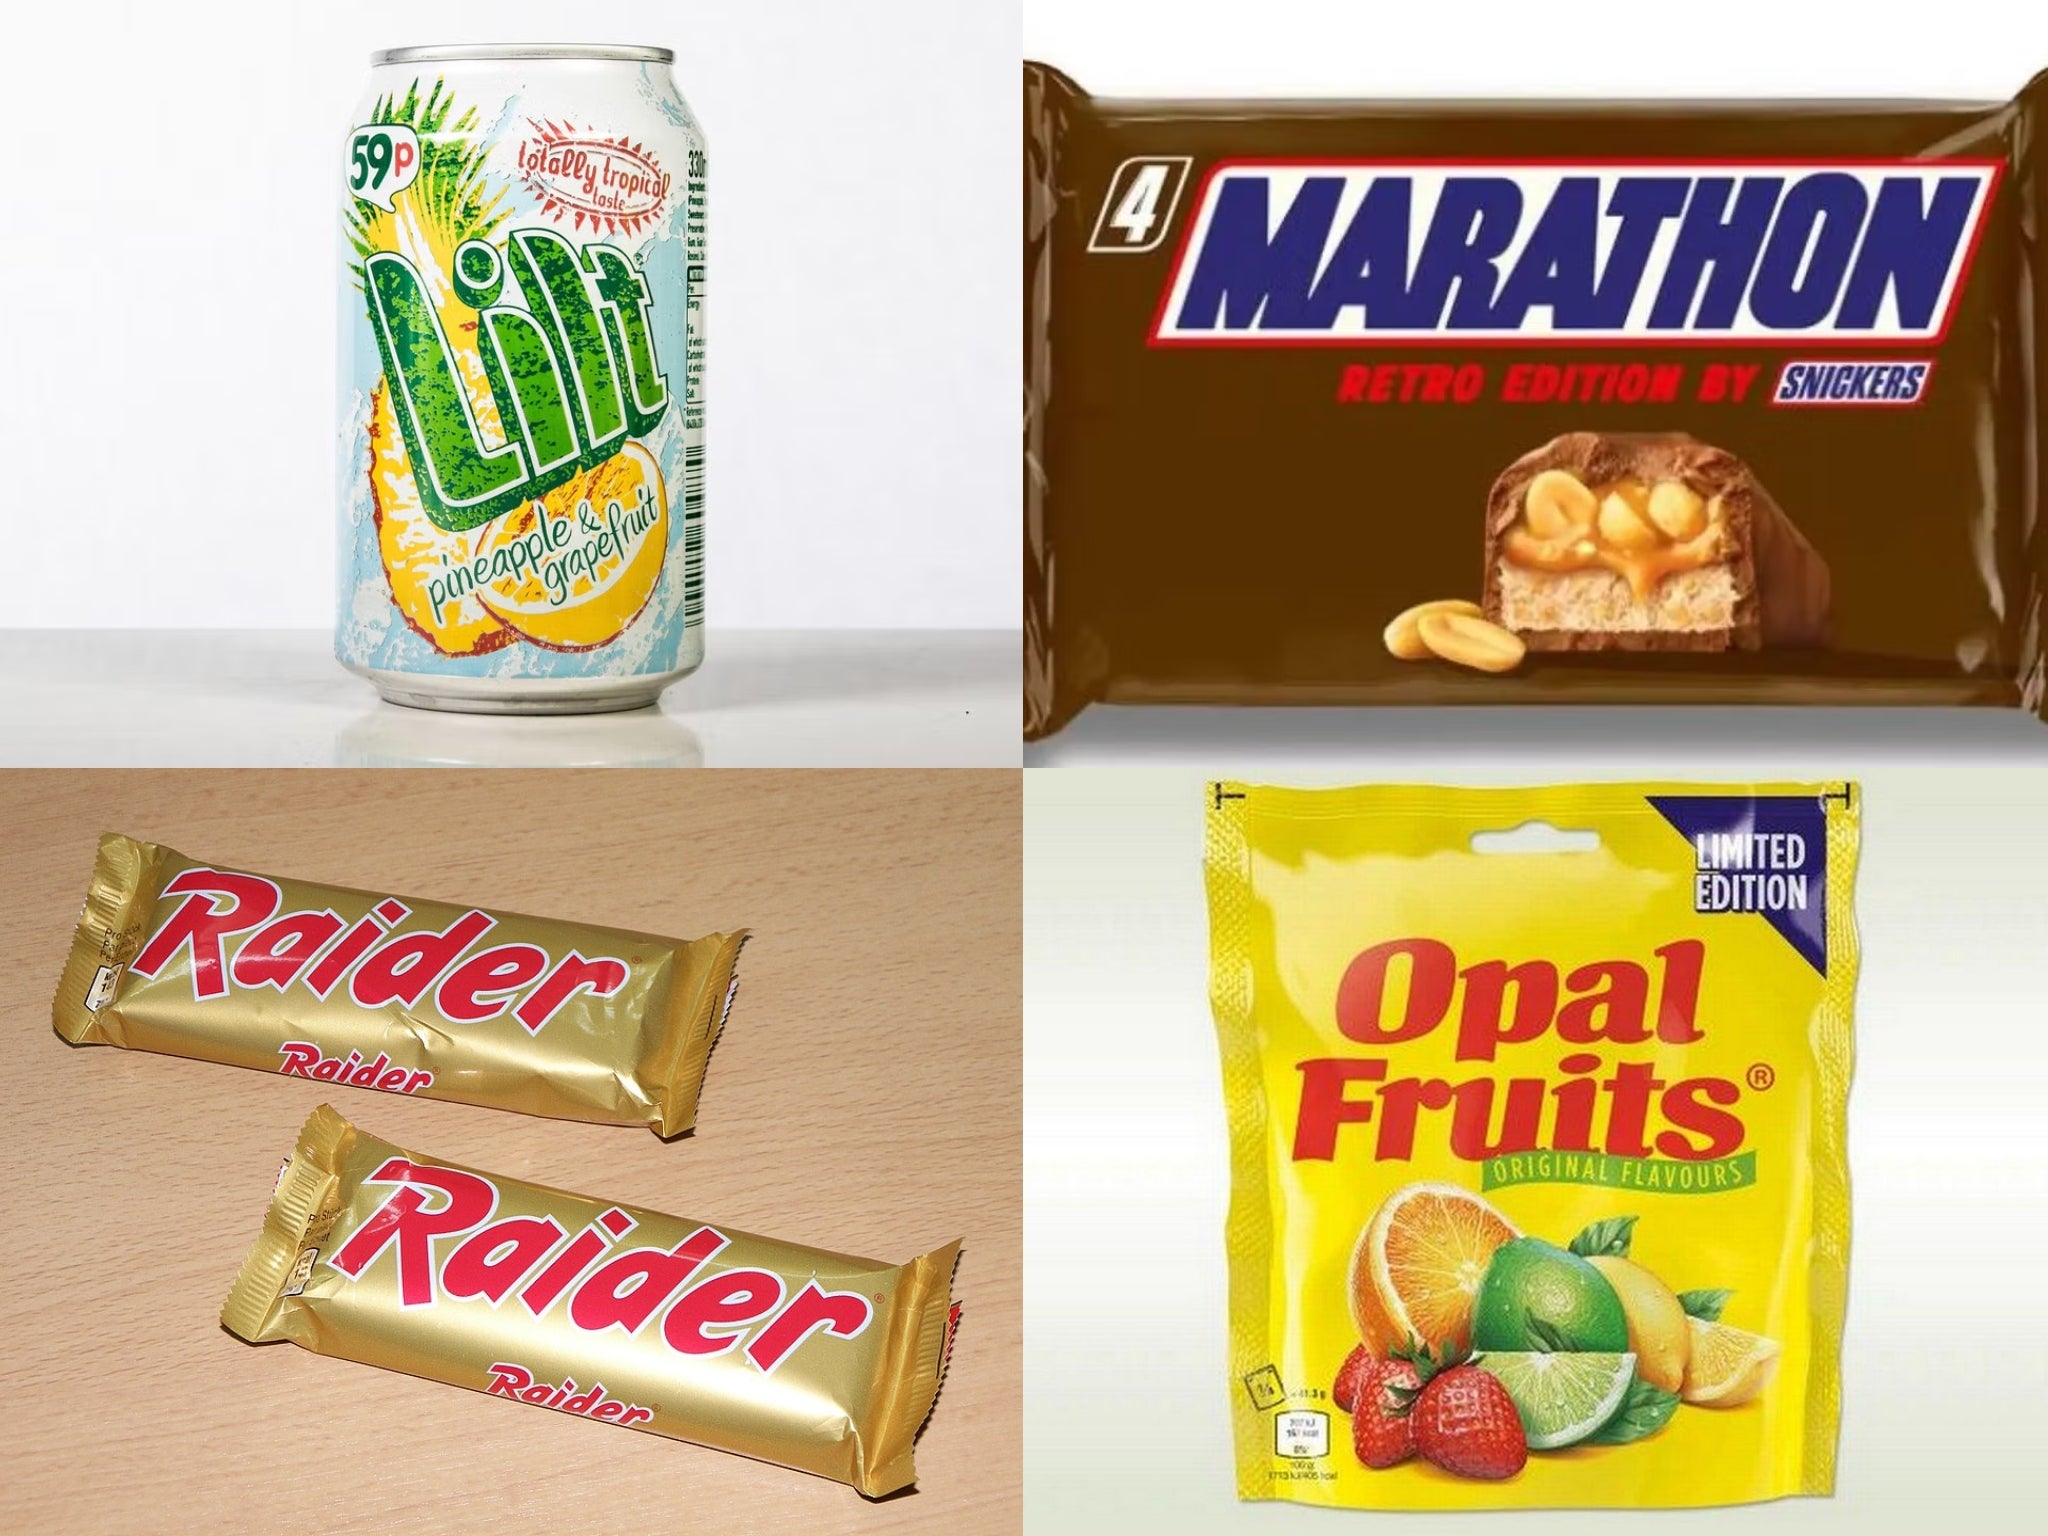 Clockwise from top left: Lilt, Marathon, Opal Fruits and Raider bars